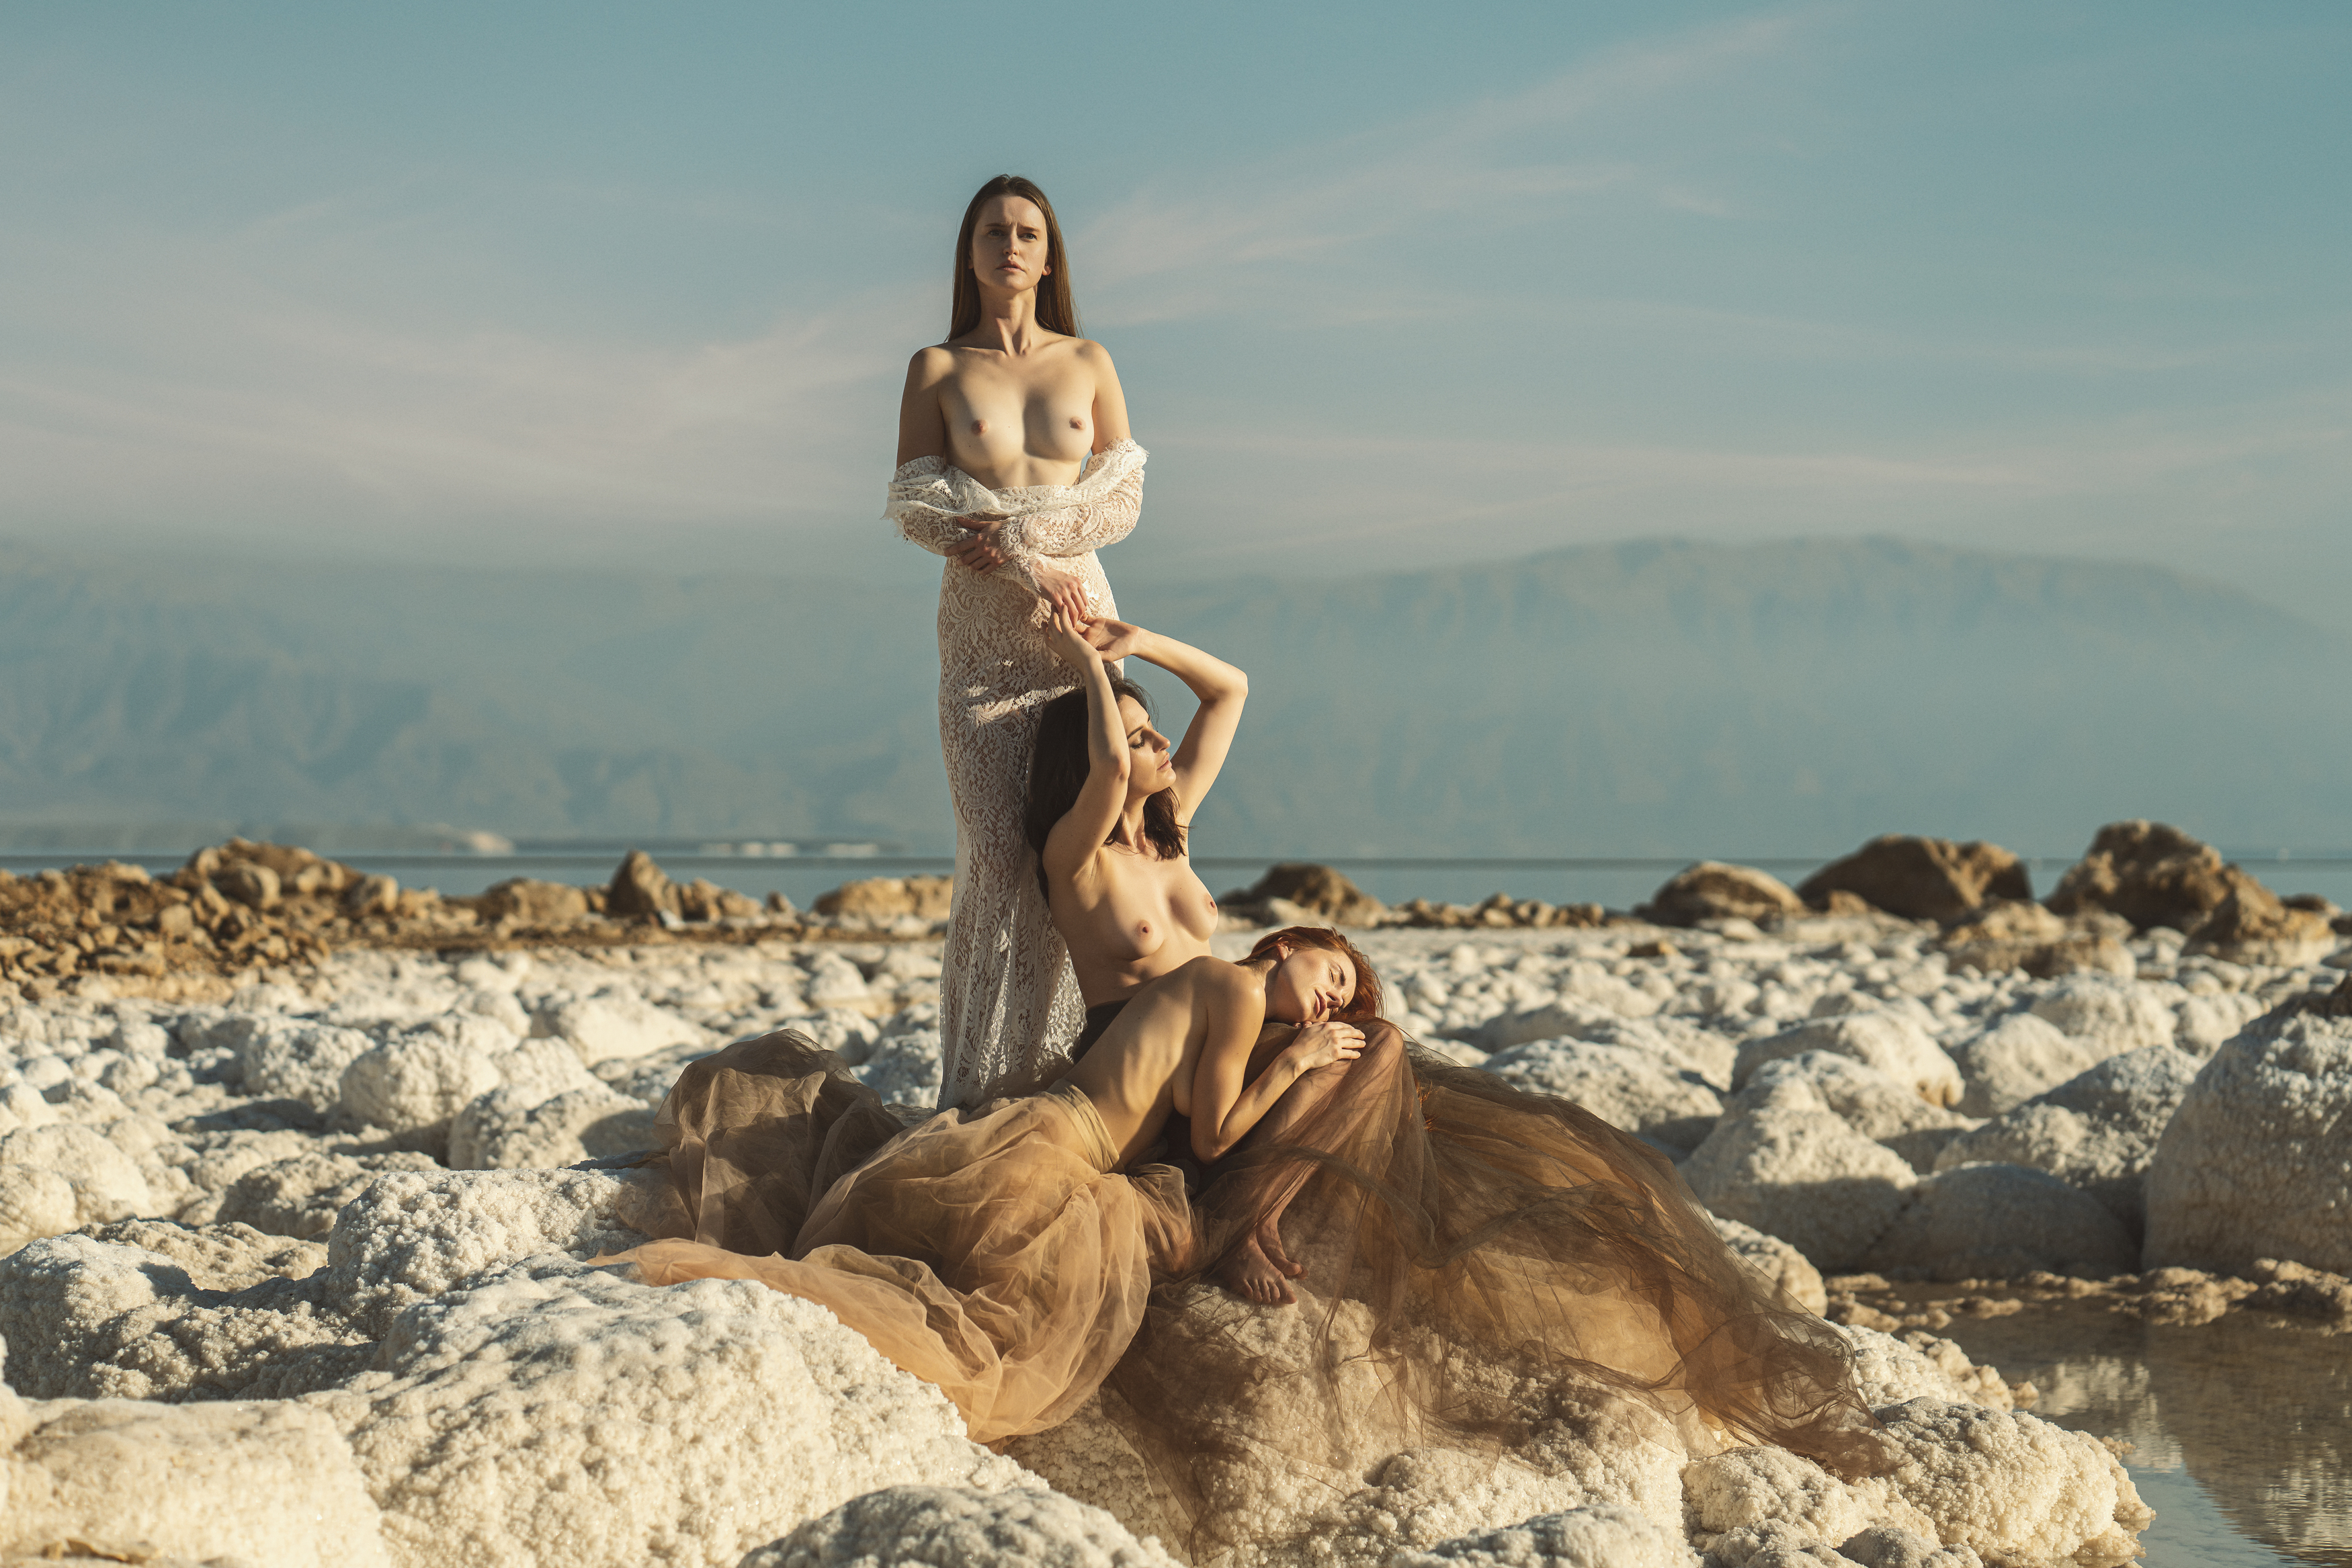 ball gown, beach, beautiful woman, clouds, dead sea, desert, dreaminess, femininity, lifestyles, looking, mountains, nude, outdoors, peignoir, reflection, salt, scene, seductive women, sensuality, sitting, sky, standing, stones, trio, water, young women, Alex Tsarfin